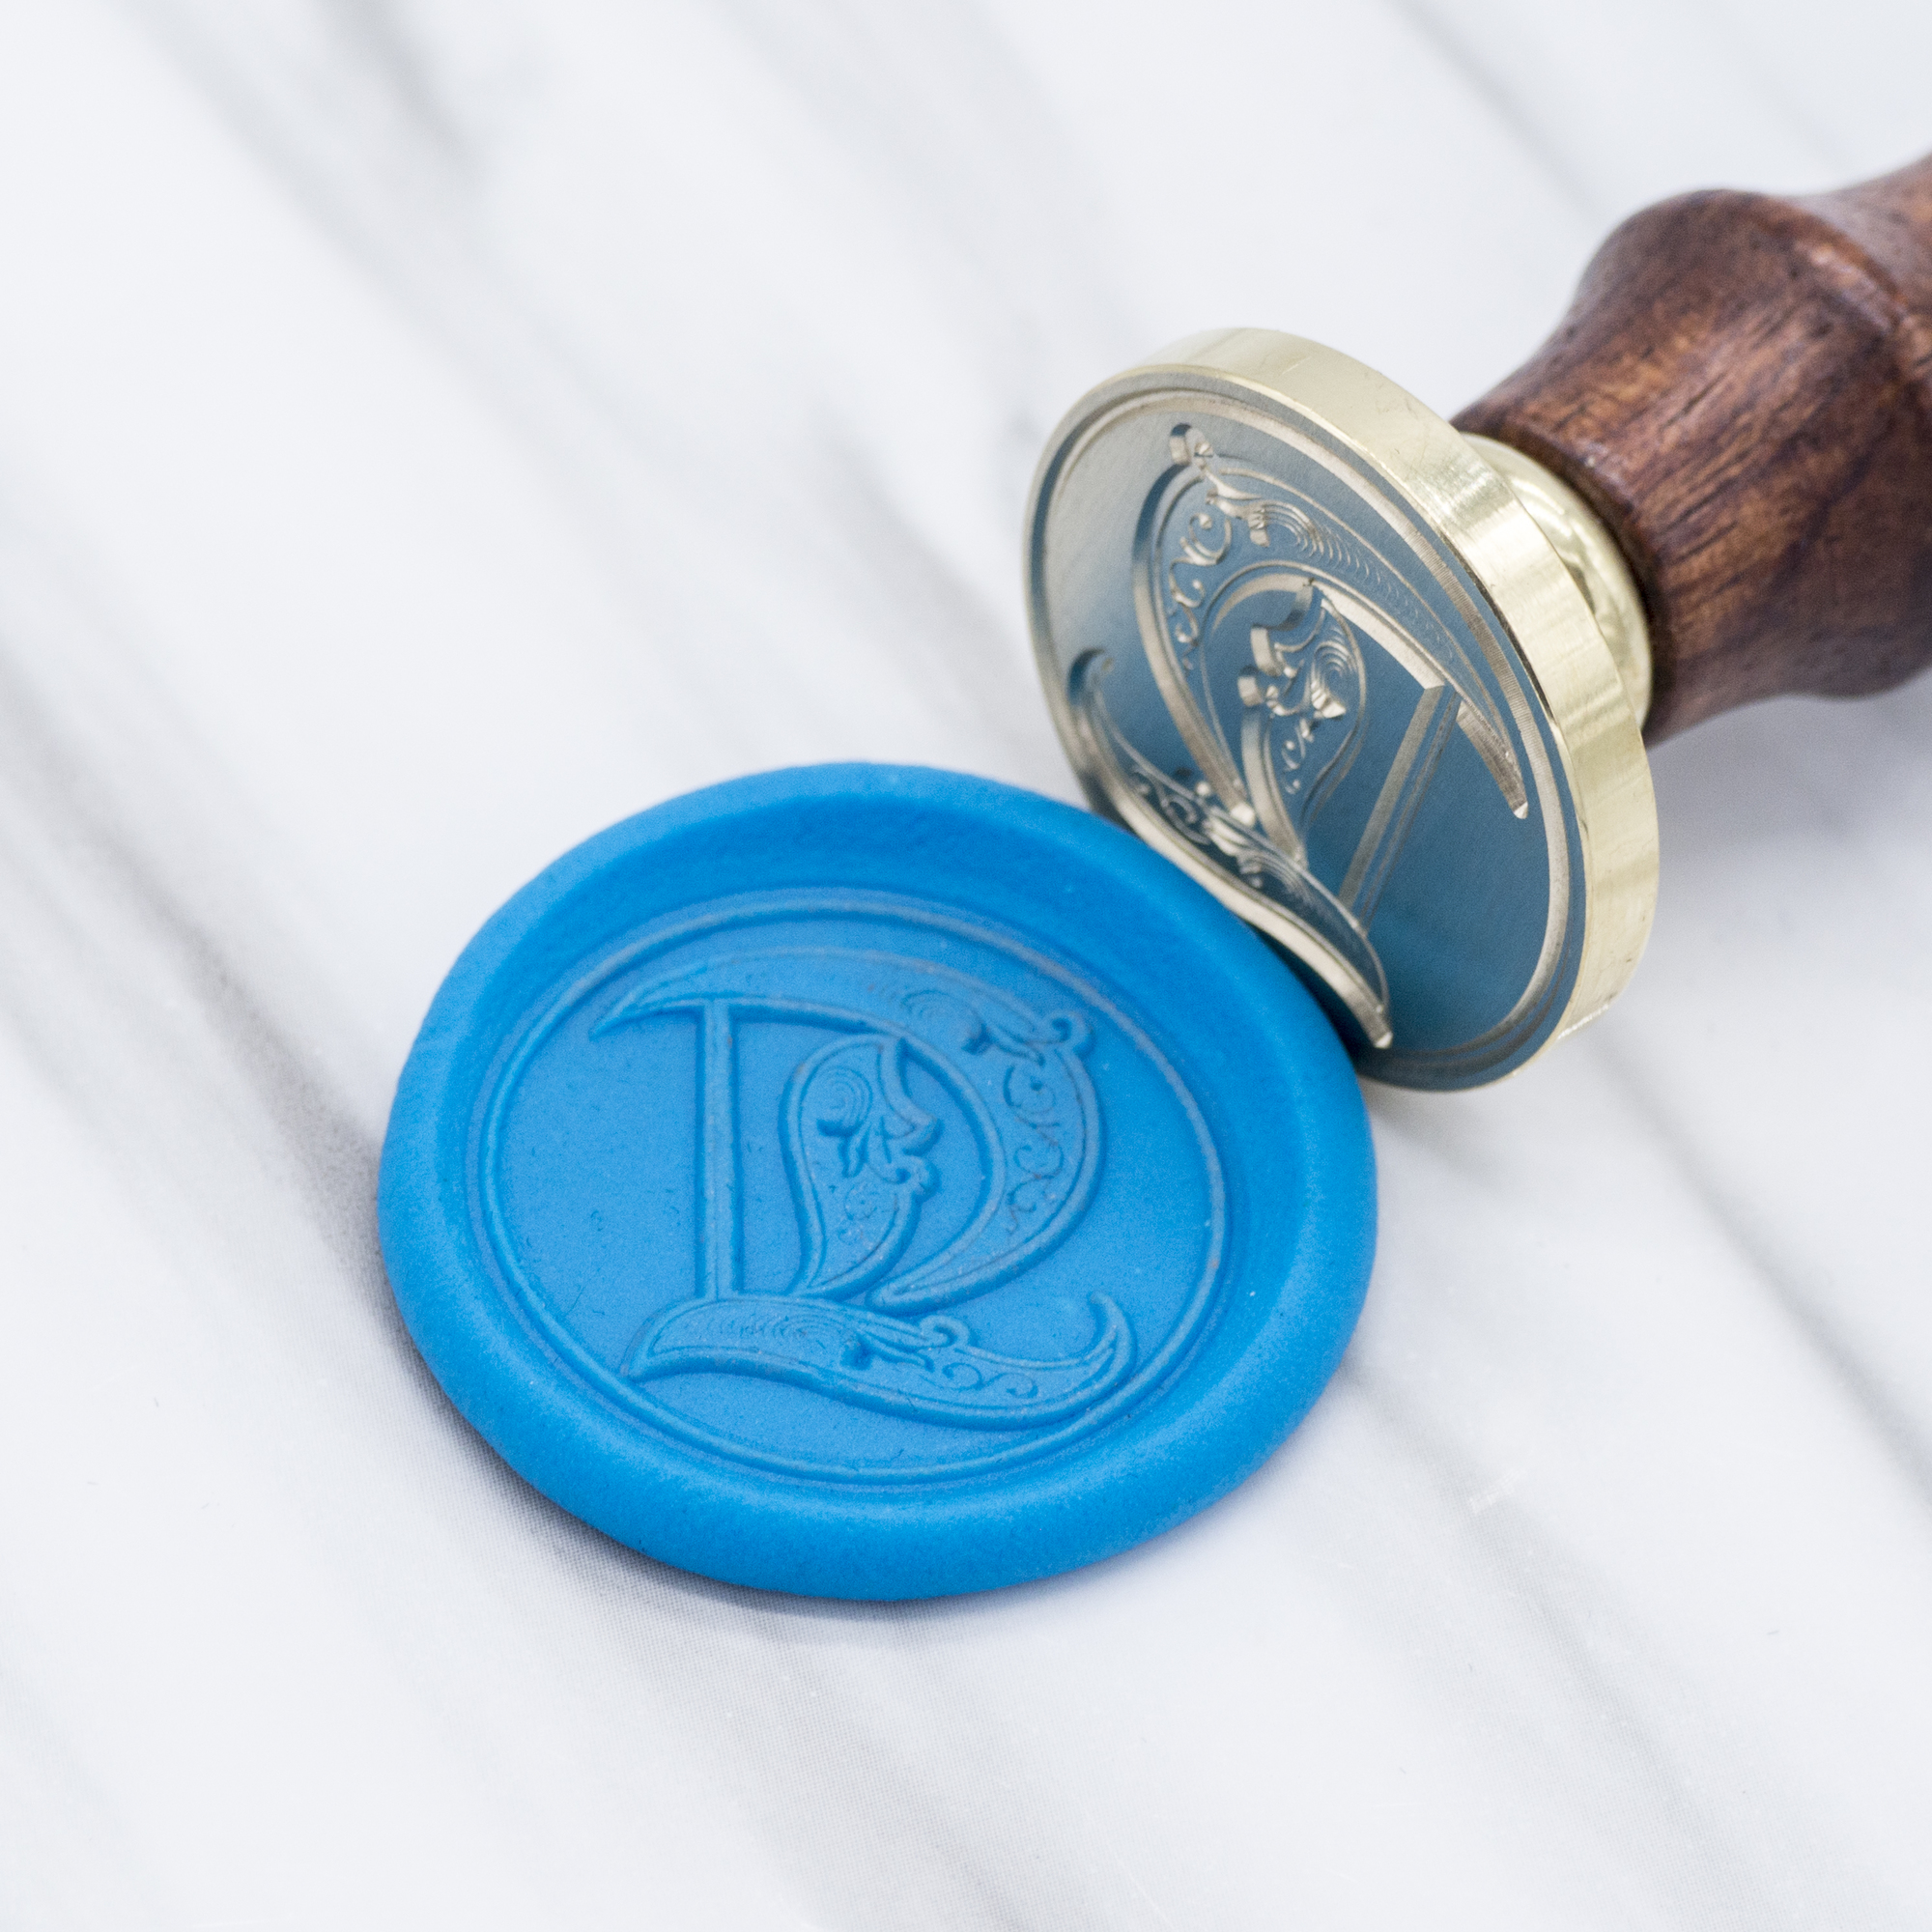 Ready Made Wax Seal Stamp - Gothic Initial Wax Seal Stamp